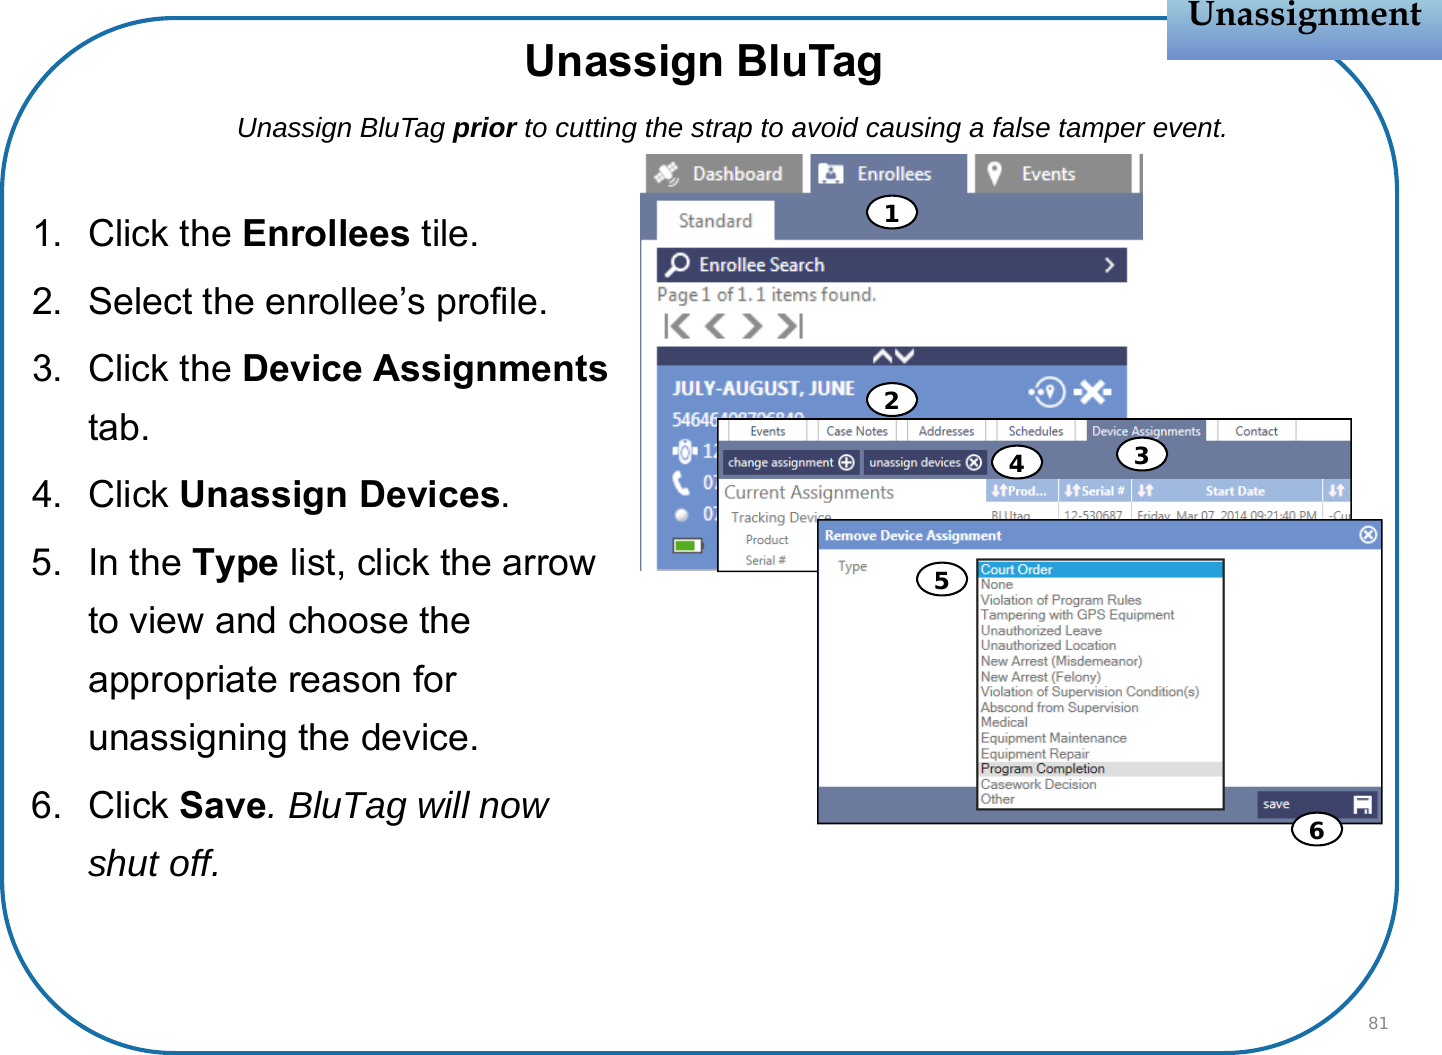 1. Click the Enrollees tile.2. Select the enrollee’s profile.3. Click the Device Assignmentstab.4. Click Unassign Devices.5. In the Type list, click the arrow to view and choose the appropriate reason for unassigning the device.6. Click Save. BluTag will now shut off.UnassignmentUnassignment81Unassign BluTagUnassign BluTag prior to cutting the strap to avoid causing a false tamper event.123456